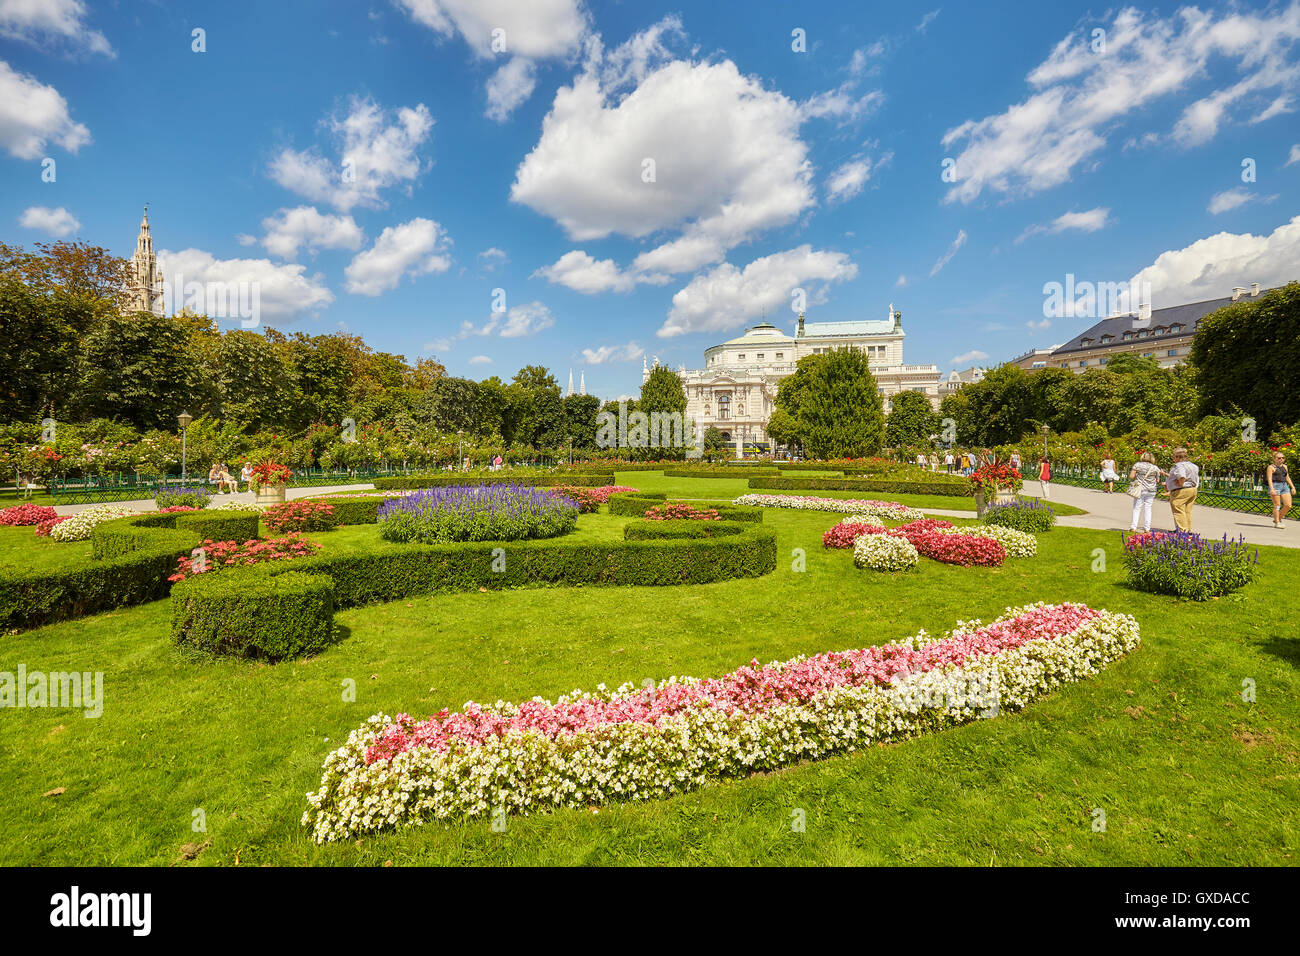 Vienna, Austria - August 14, 2016: View of famous Volksgarten (People's Garden), which is part of the Hofburg Palace. Stock Photo